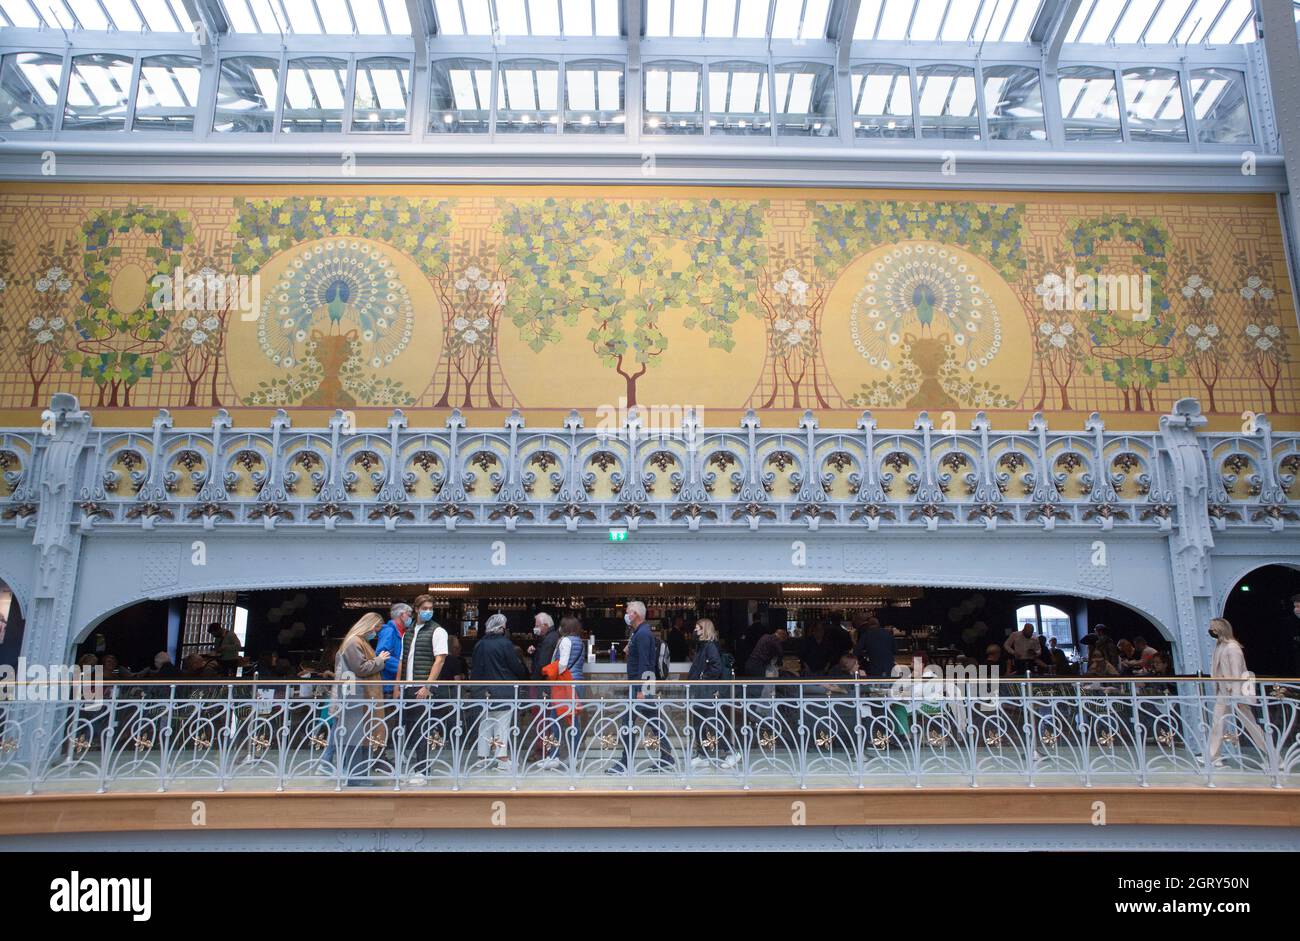 Paris, France, 1 October 2021: The Samaritaine department store has reopened after a long refurbishment which has preserved many of it's art deco and art nouveau features. The building now includes a hotel, the Cheval Blanc, and several spaces for eating and drinking, most notably under the glass roof surrounded by murals of peacocks. On the ground floor the 'Boutique de Loulou' sells gift items while the rest of the store is devoted to luxury designer brands. Anna Watson/Alamy Live News Stock Photo